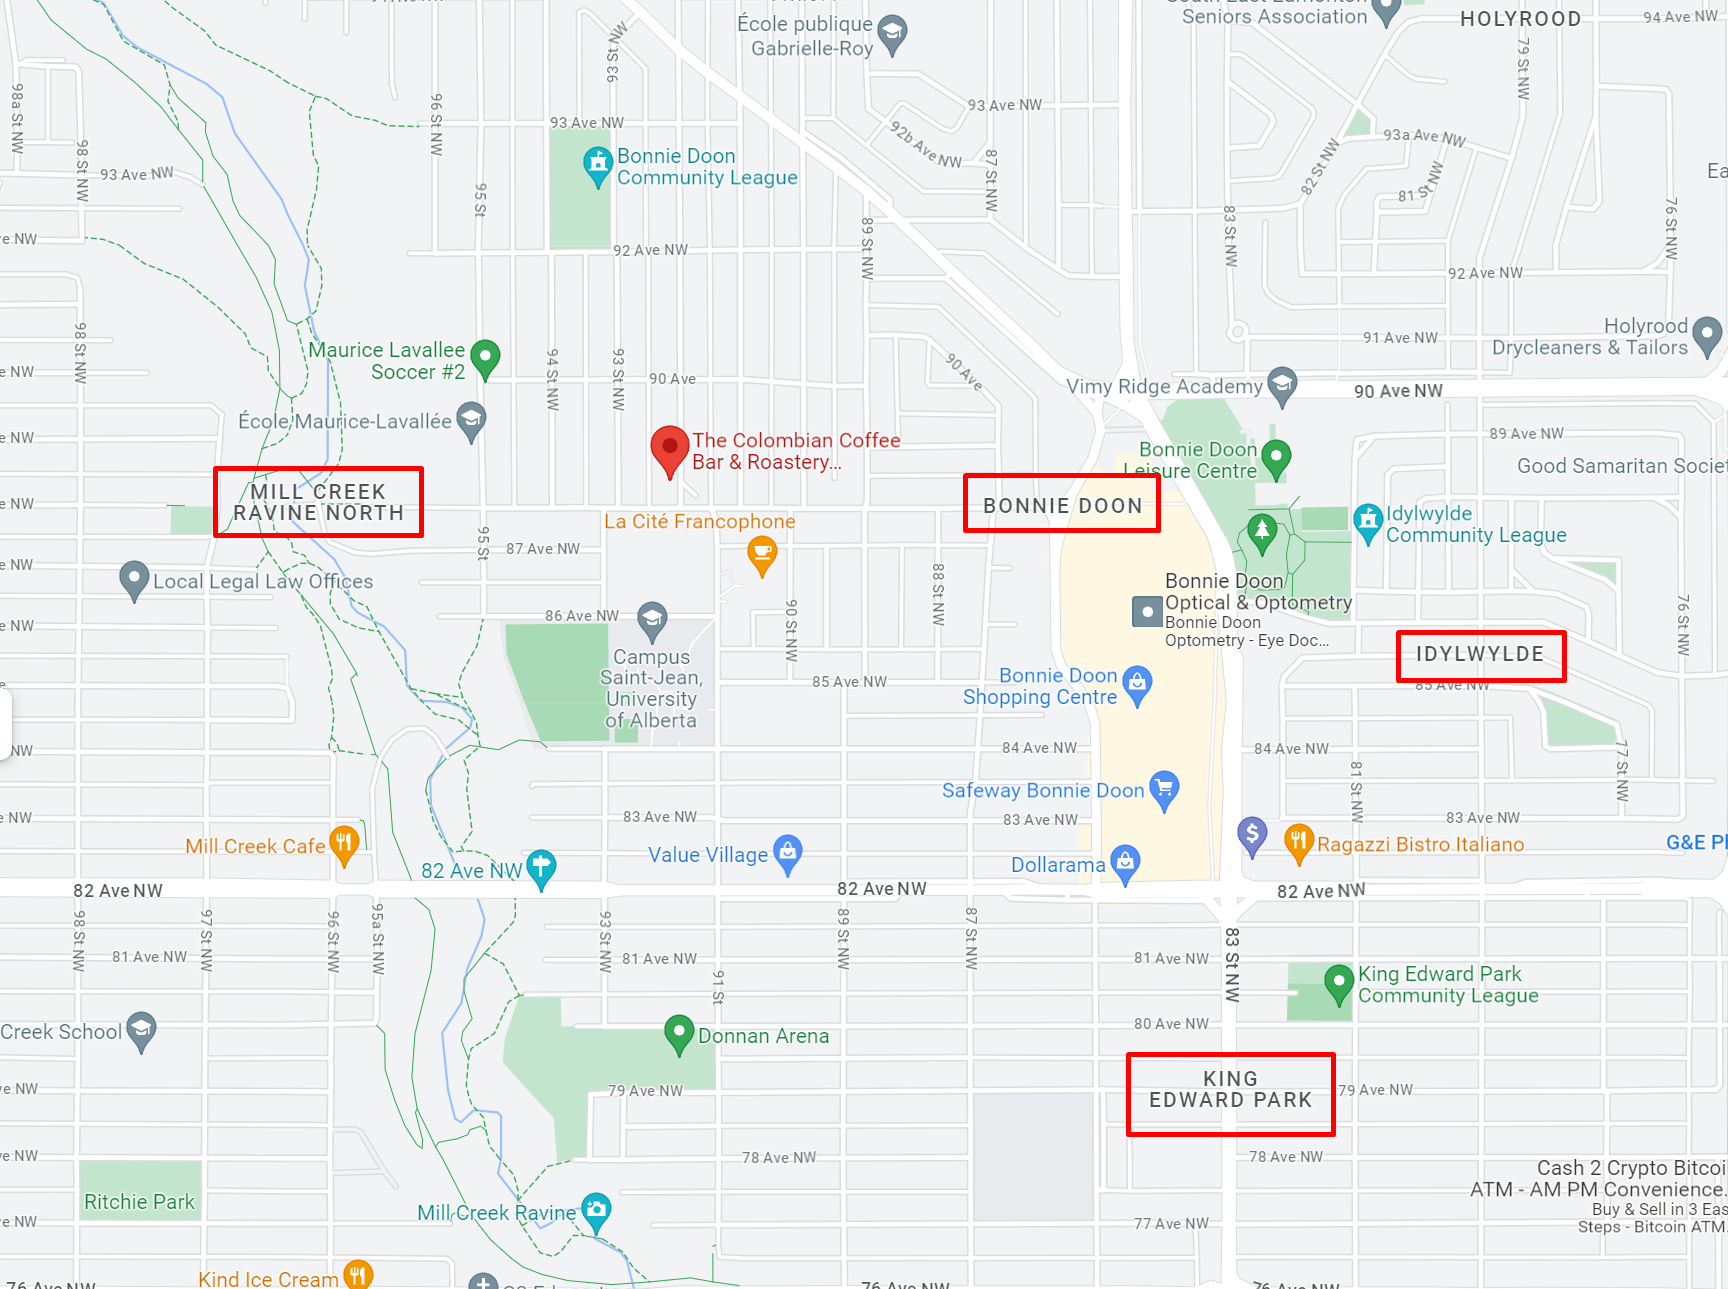 Example of localities or surrounding neighbourhoods that Google Maps identifies near a local business that can be optimized for in title tags.